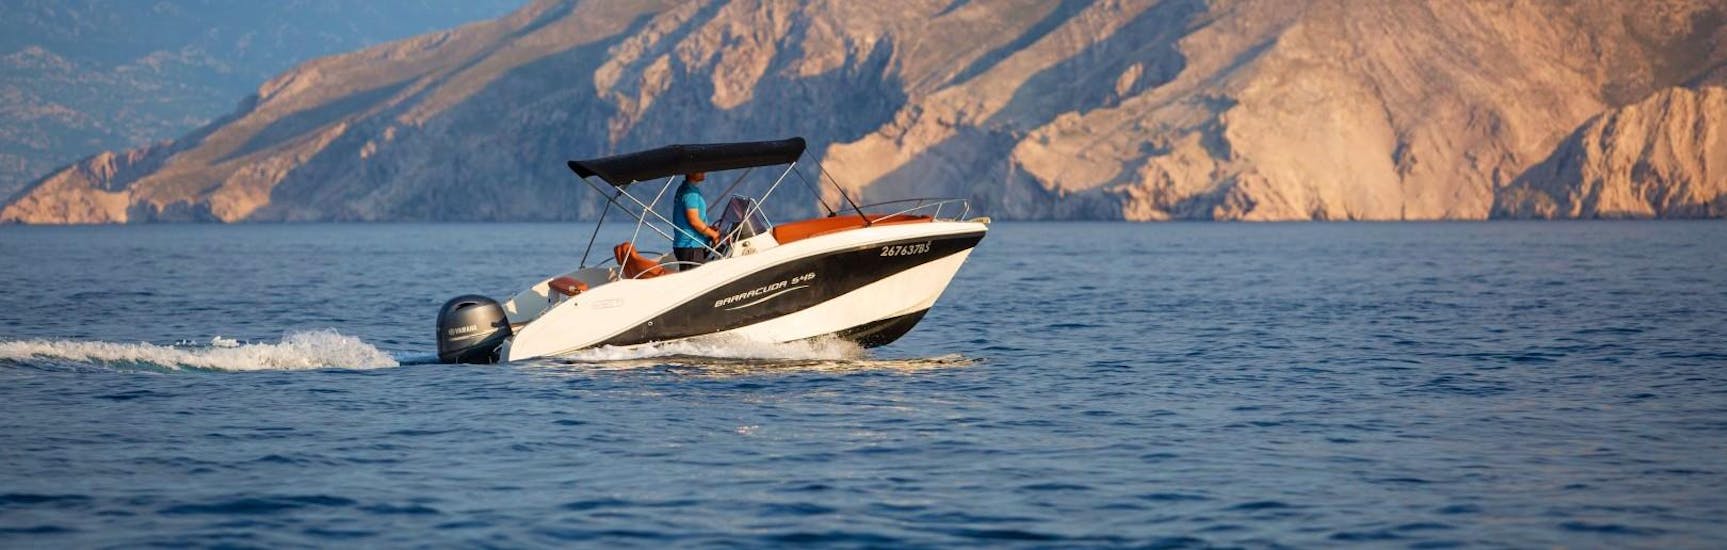 Man navigating with the Barracuda 545, from King Rent a Boat.